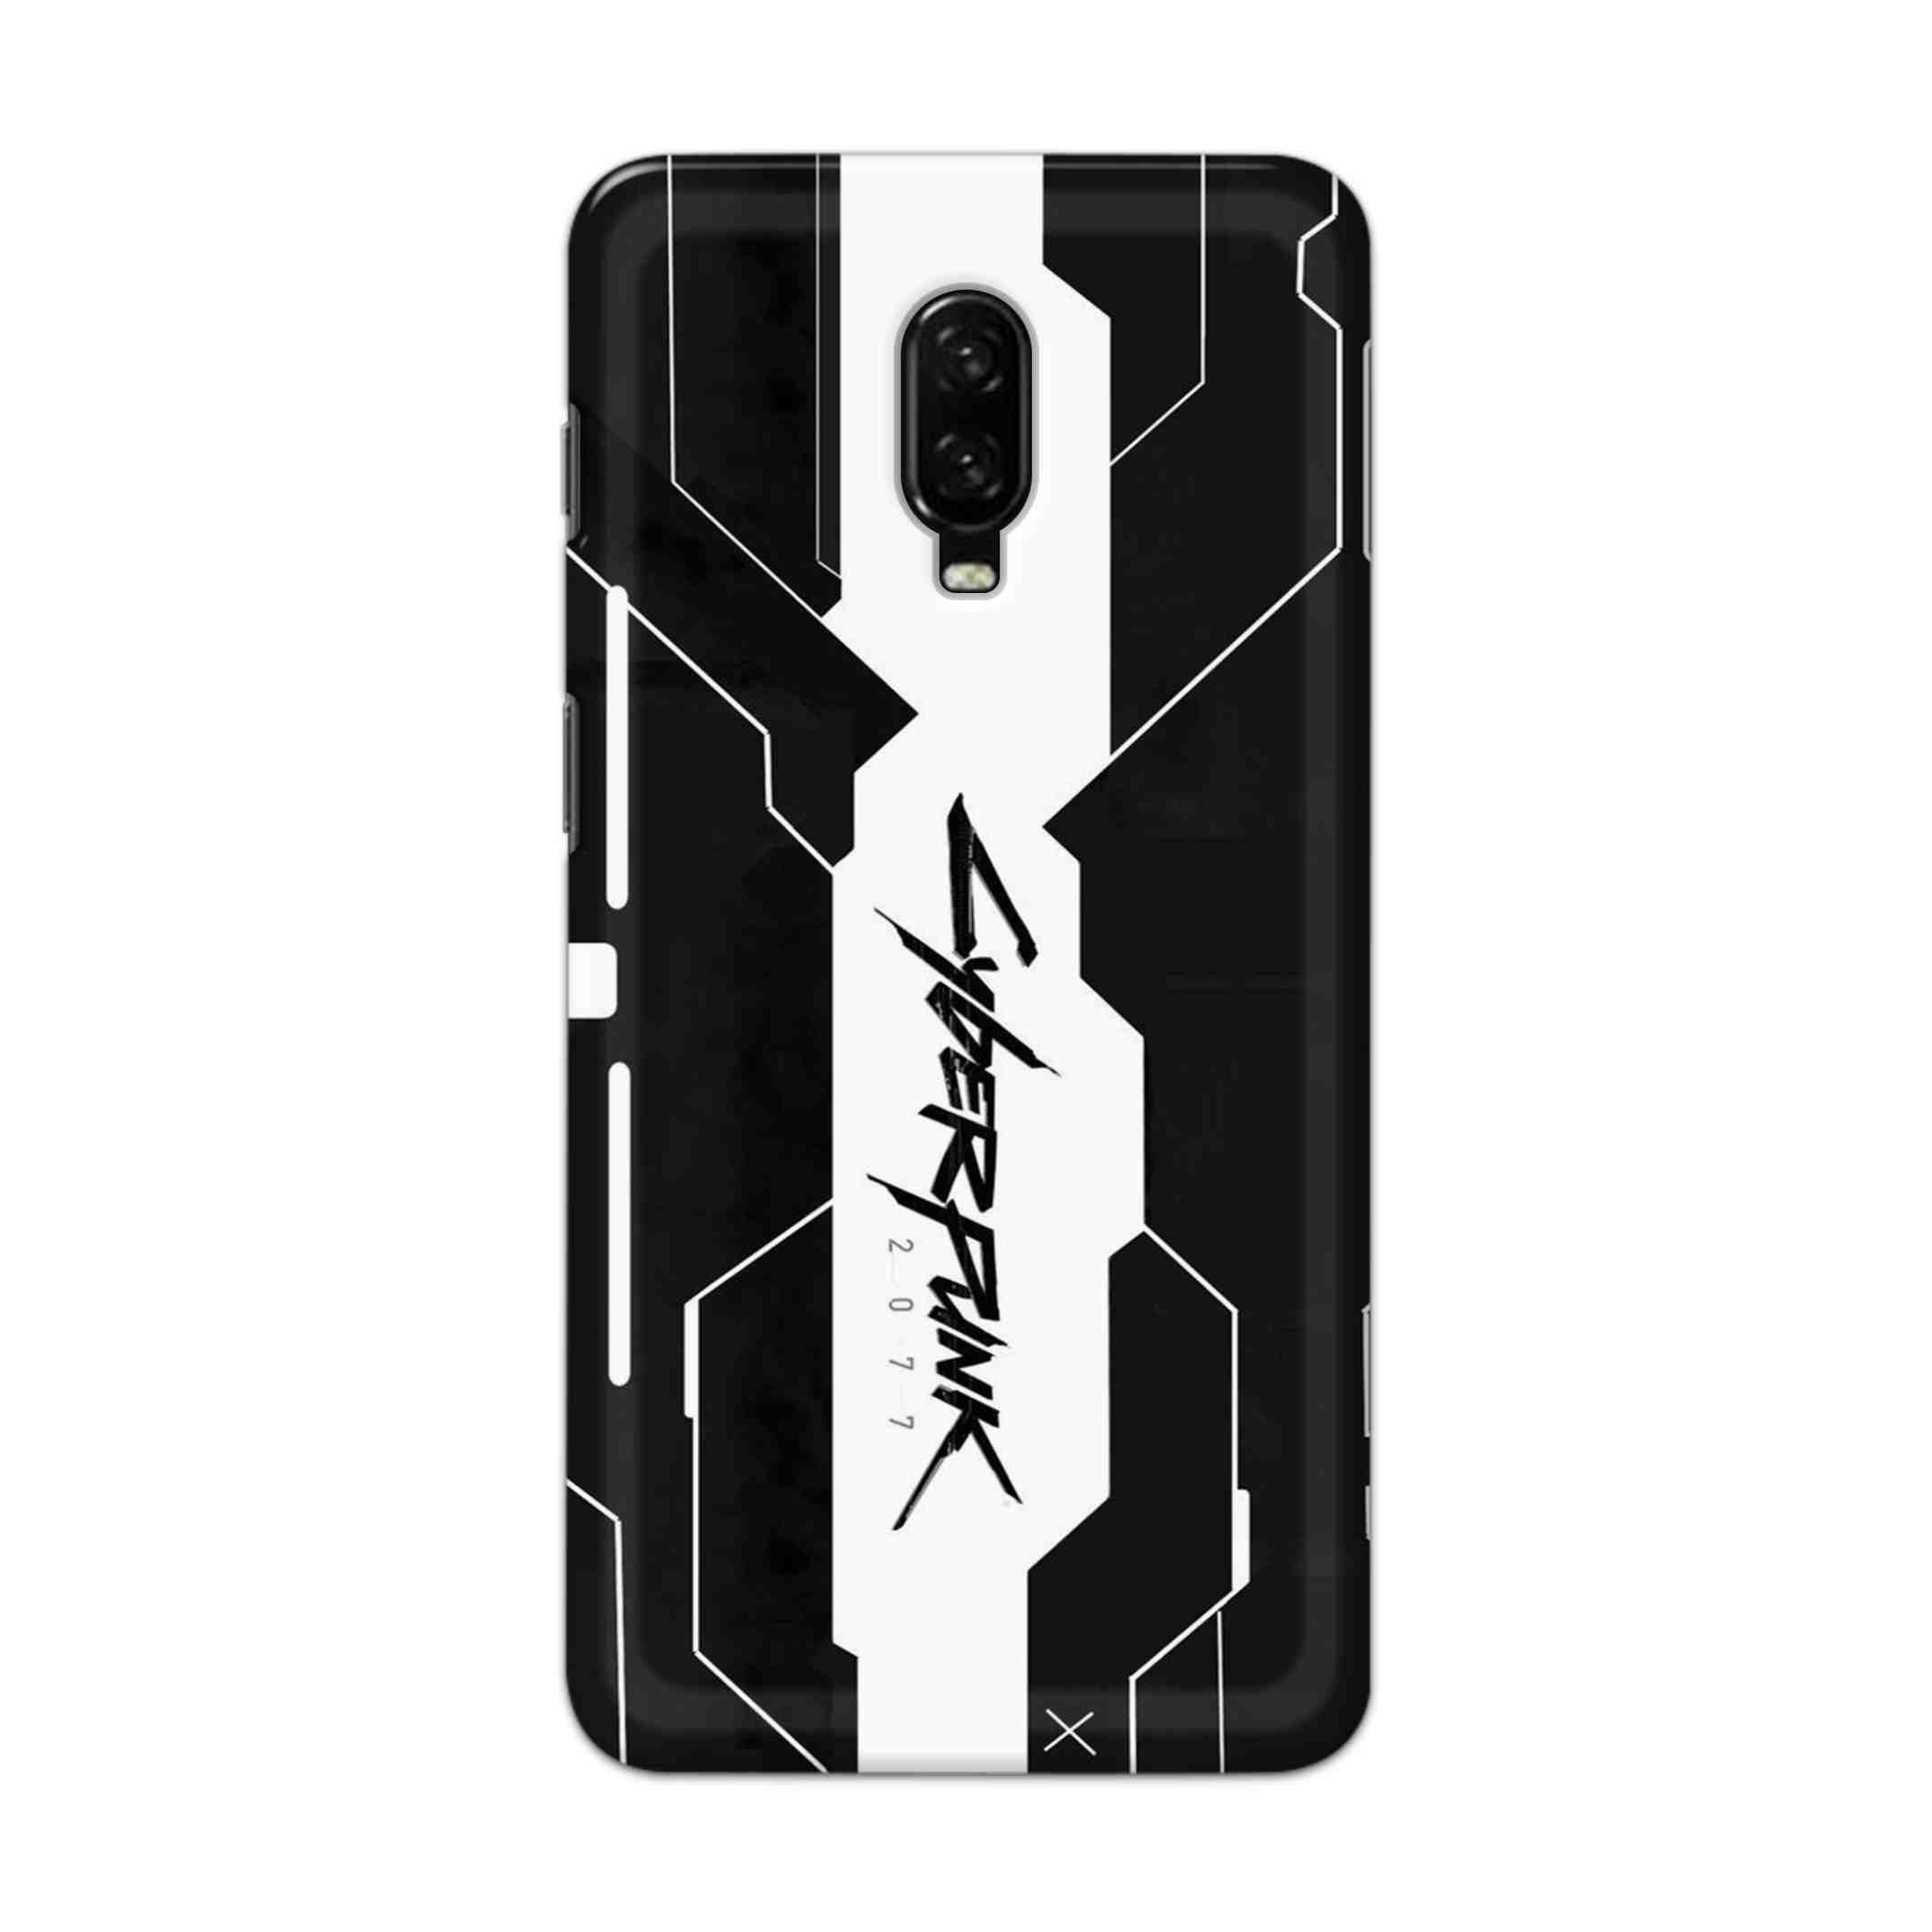 Buy Cyberpunk 2077 Art Hard Back Mobile Phone Case Cover For OnePlus 6T Online